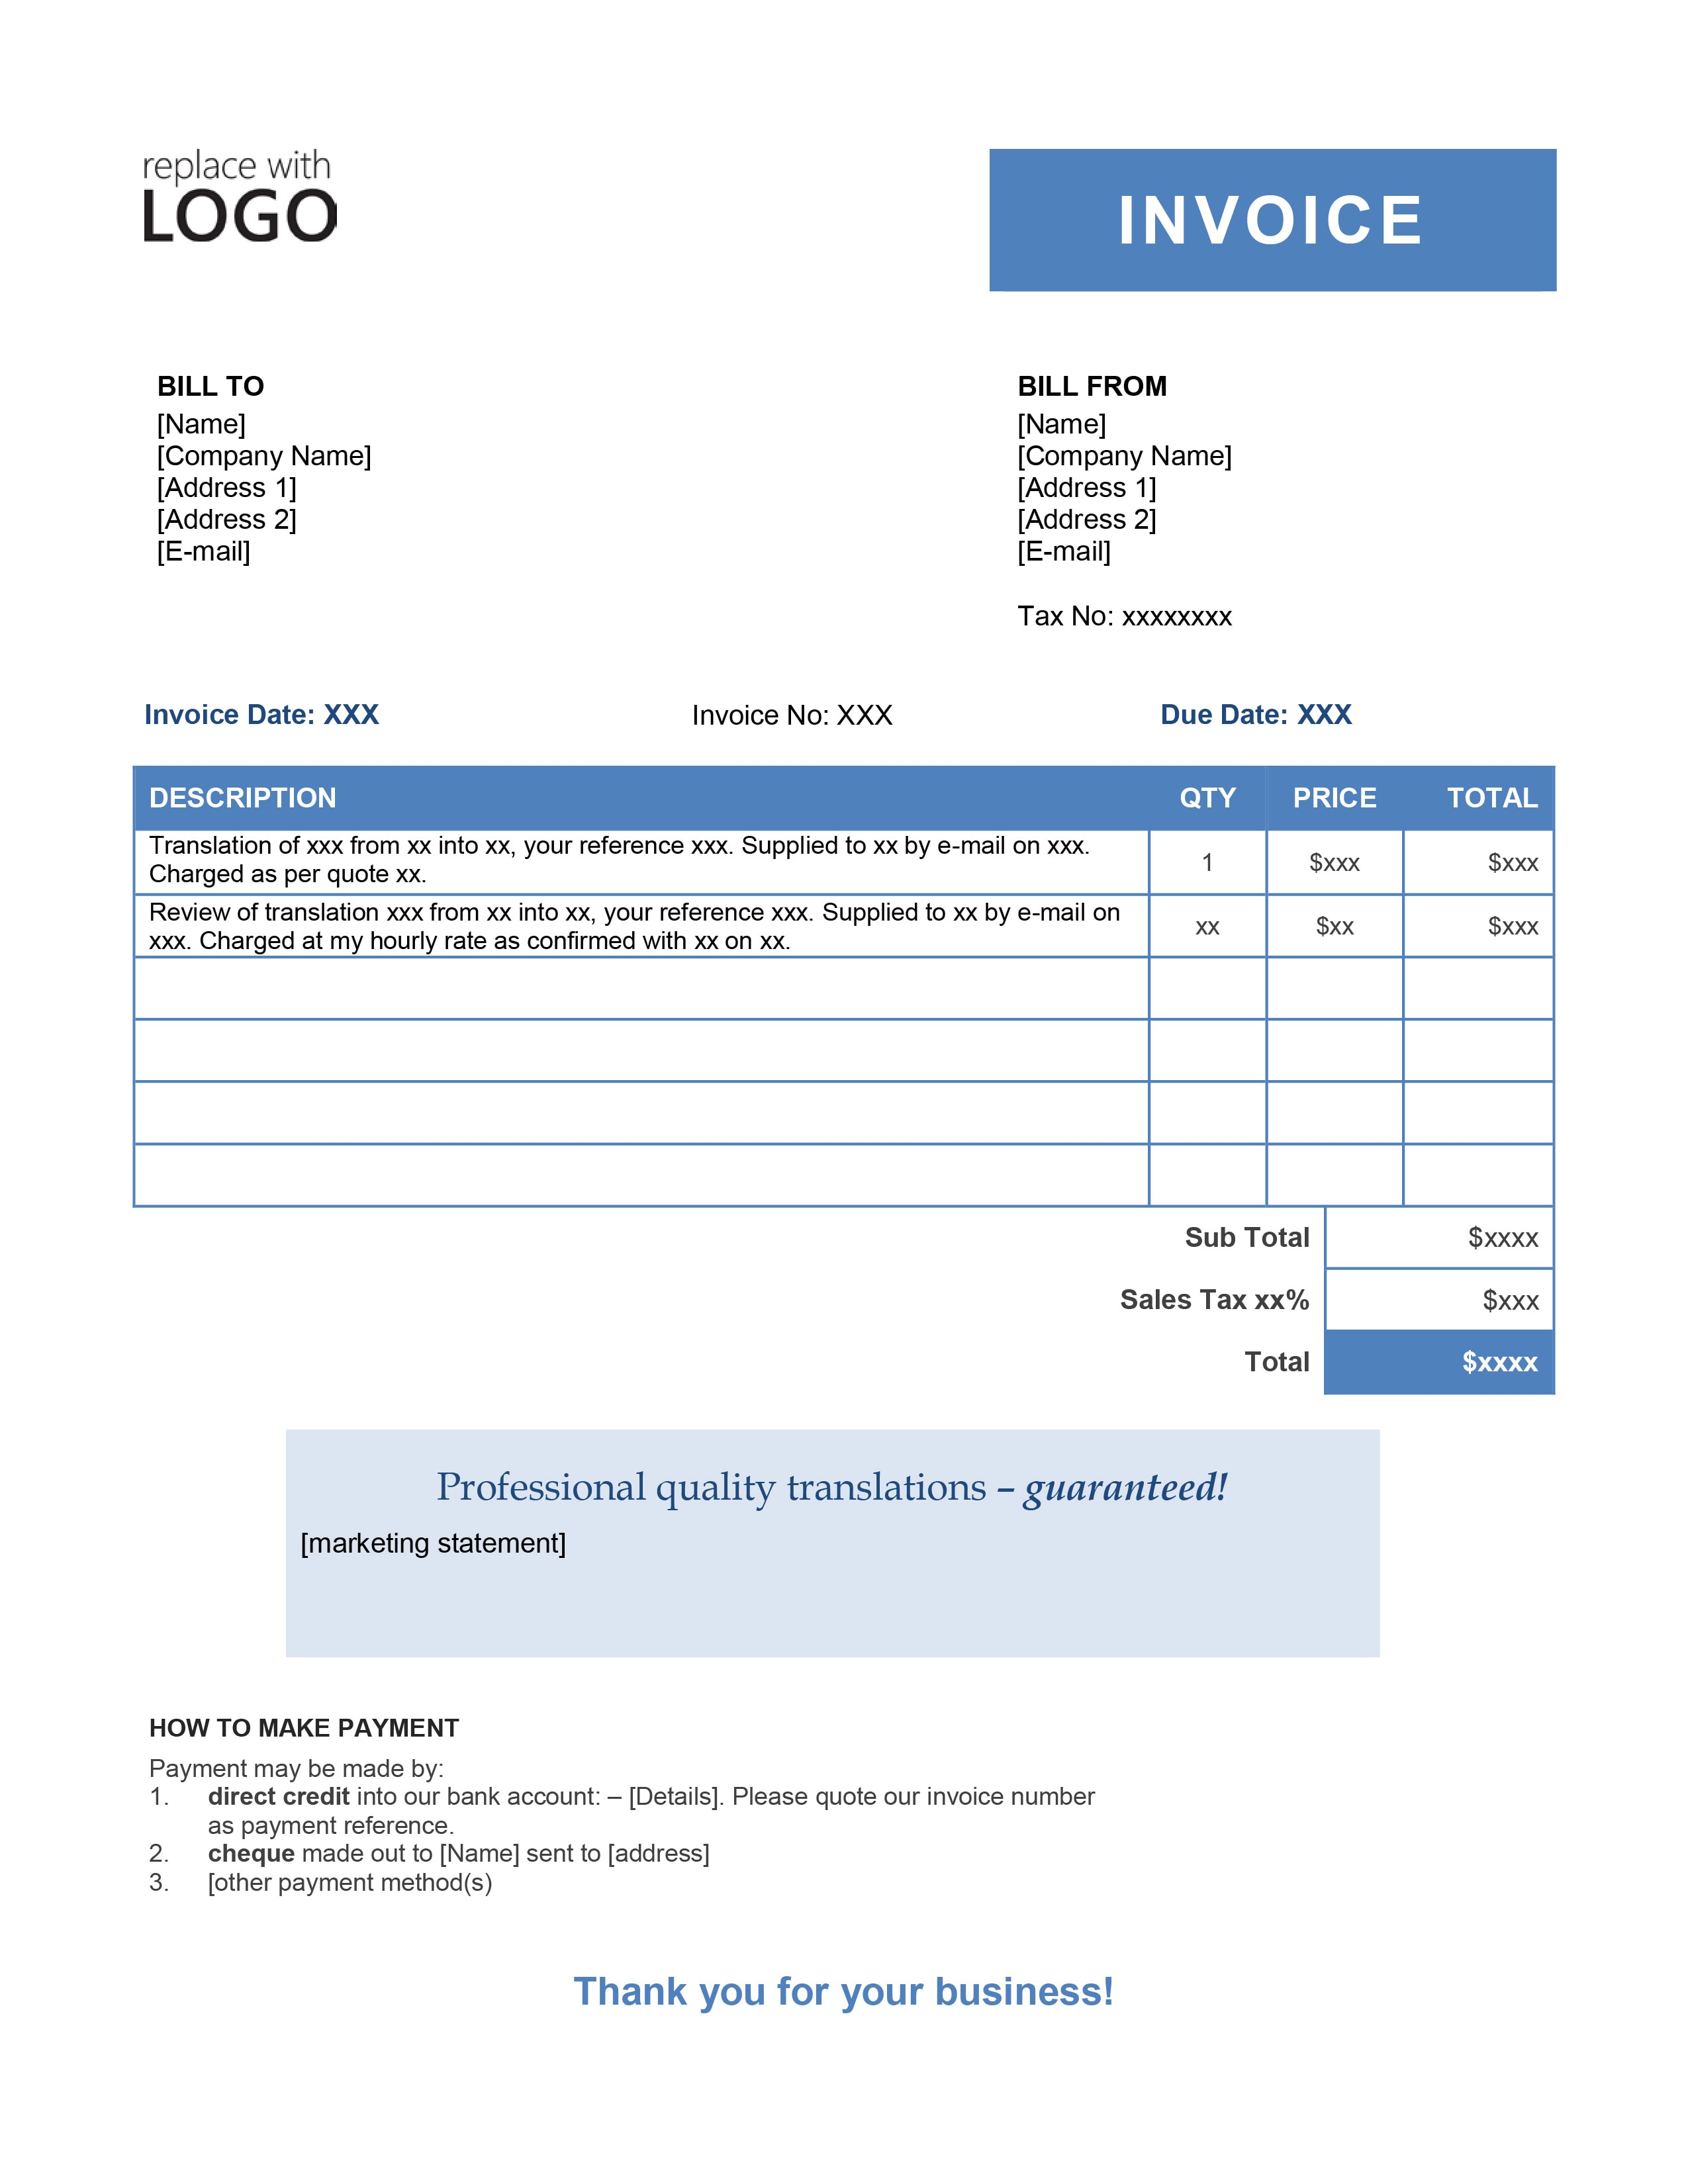 Bill Of Services Template from www.pactranz.com